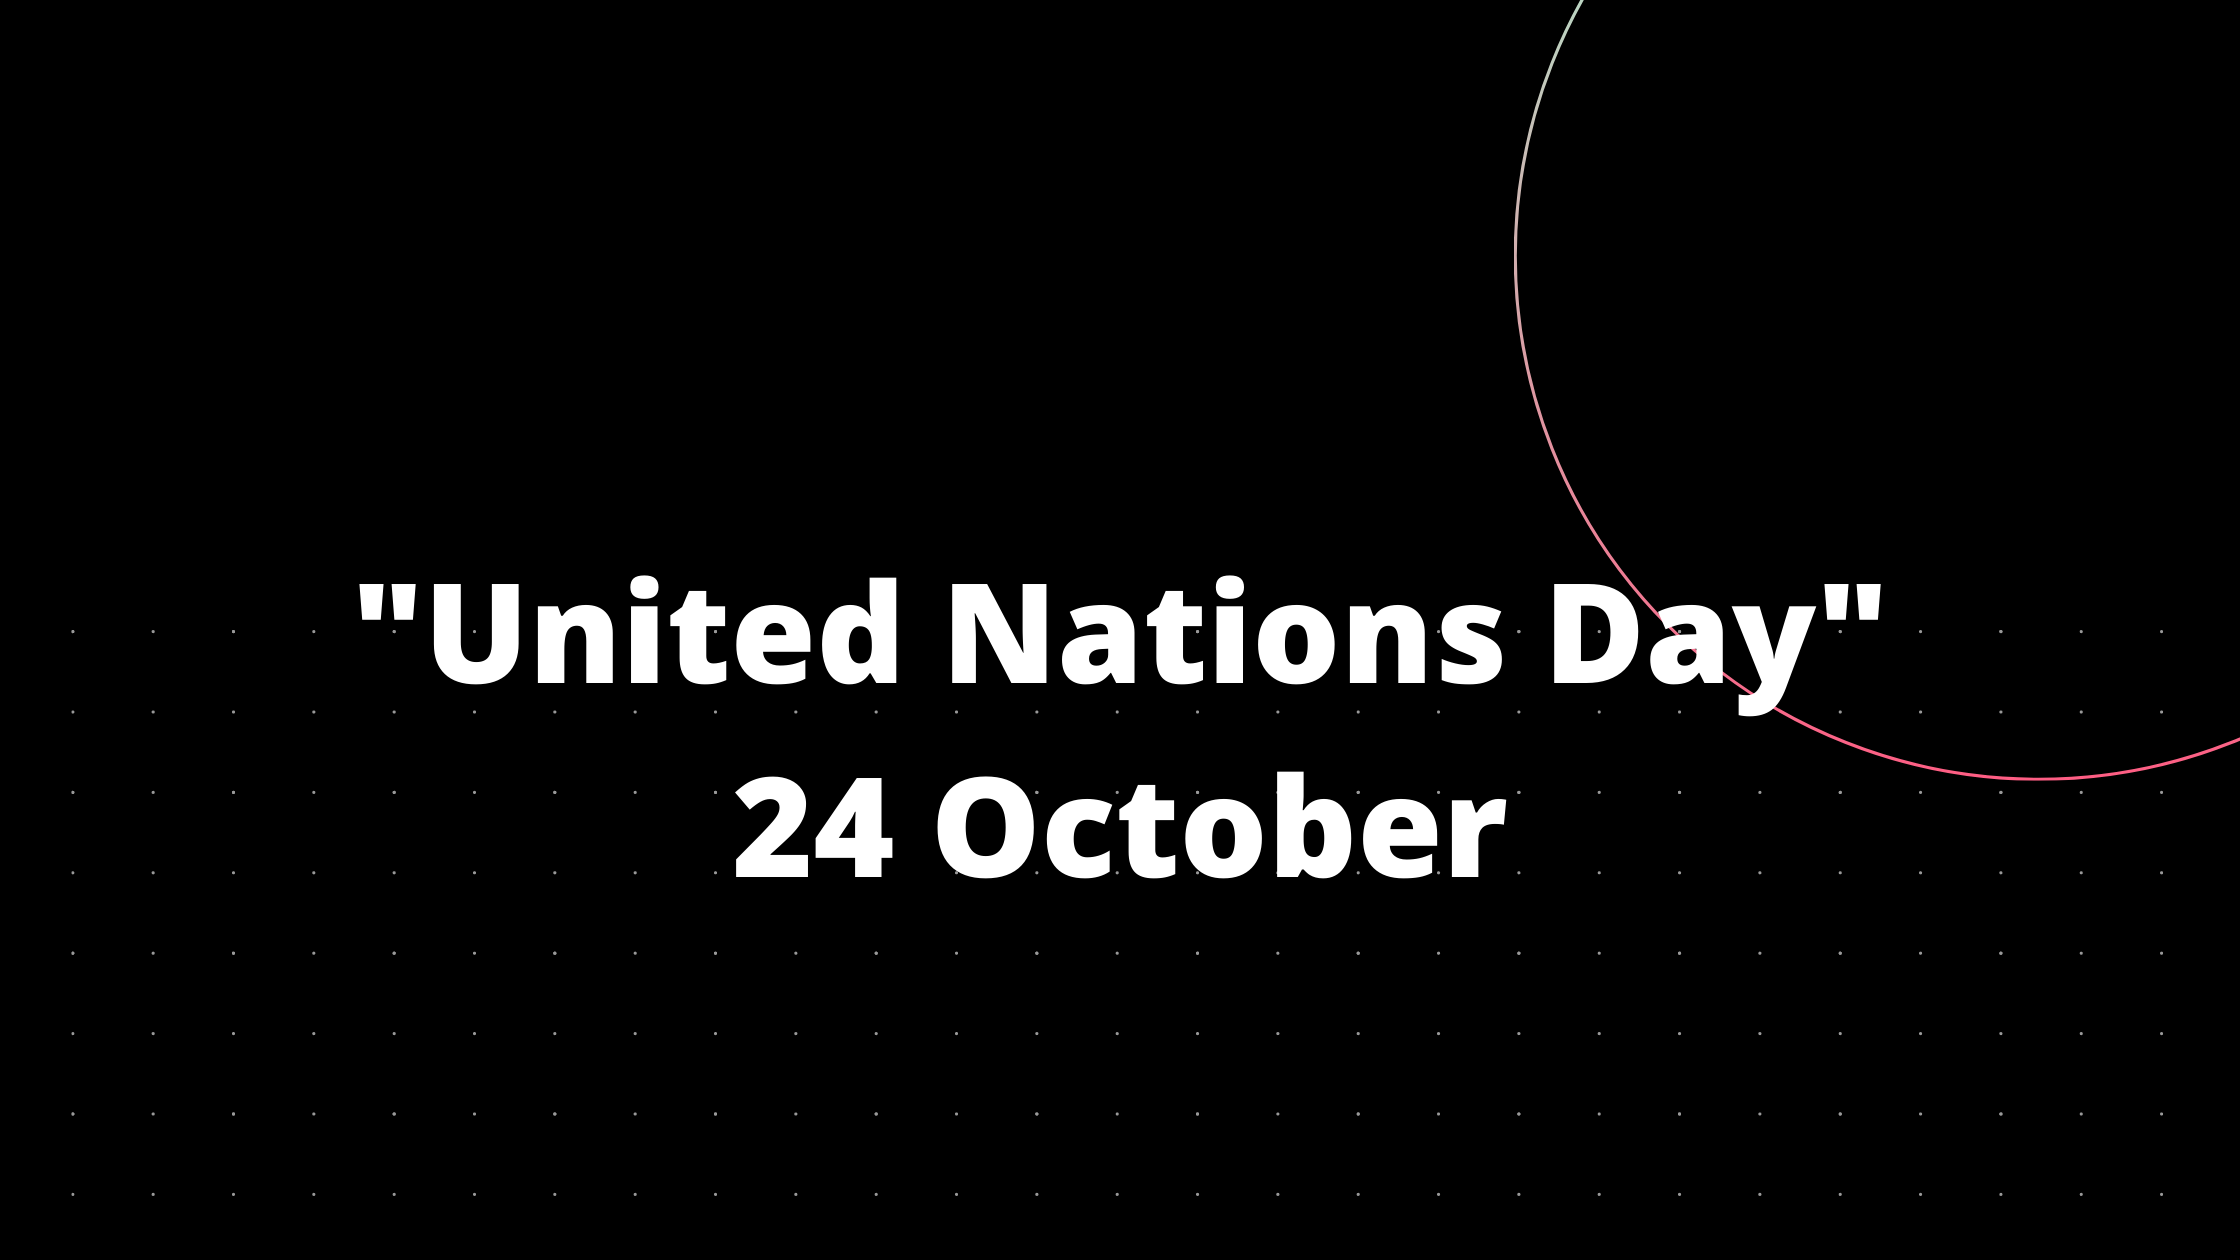 United Nations Day- 24 October 2020